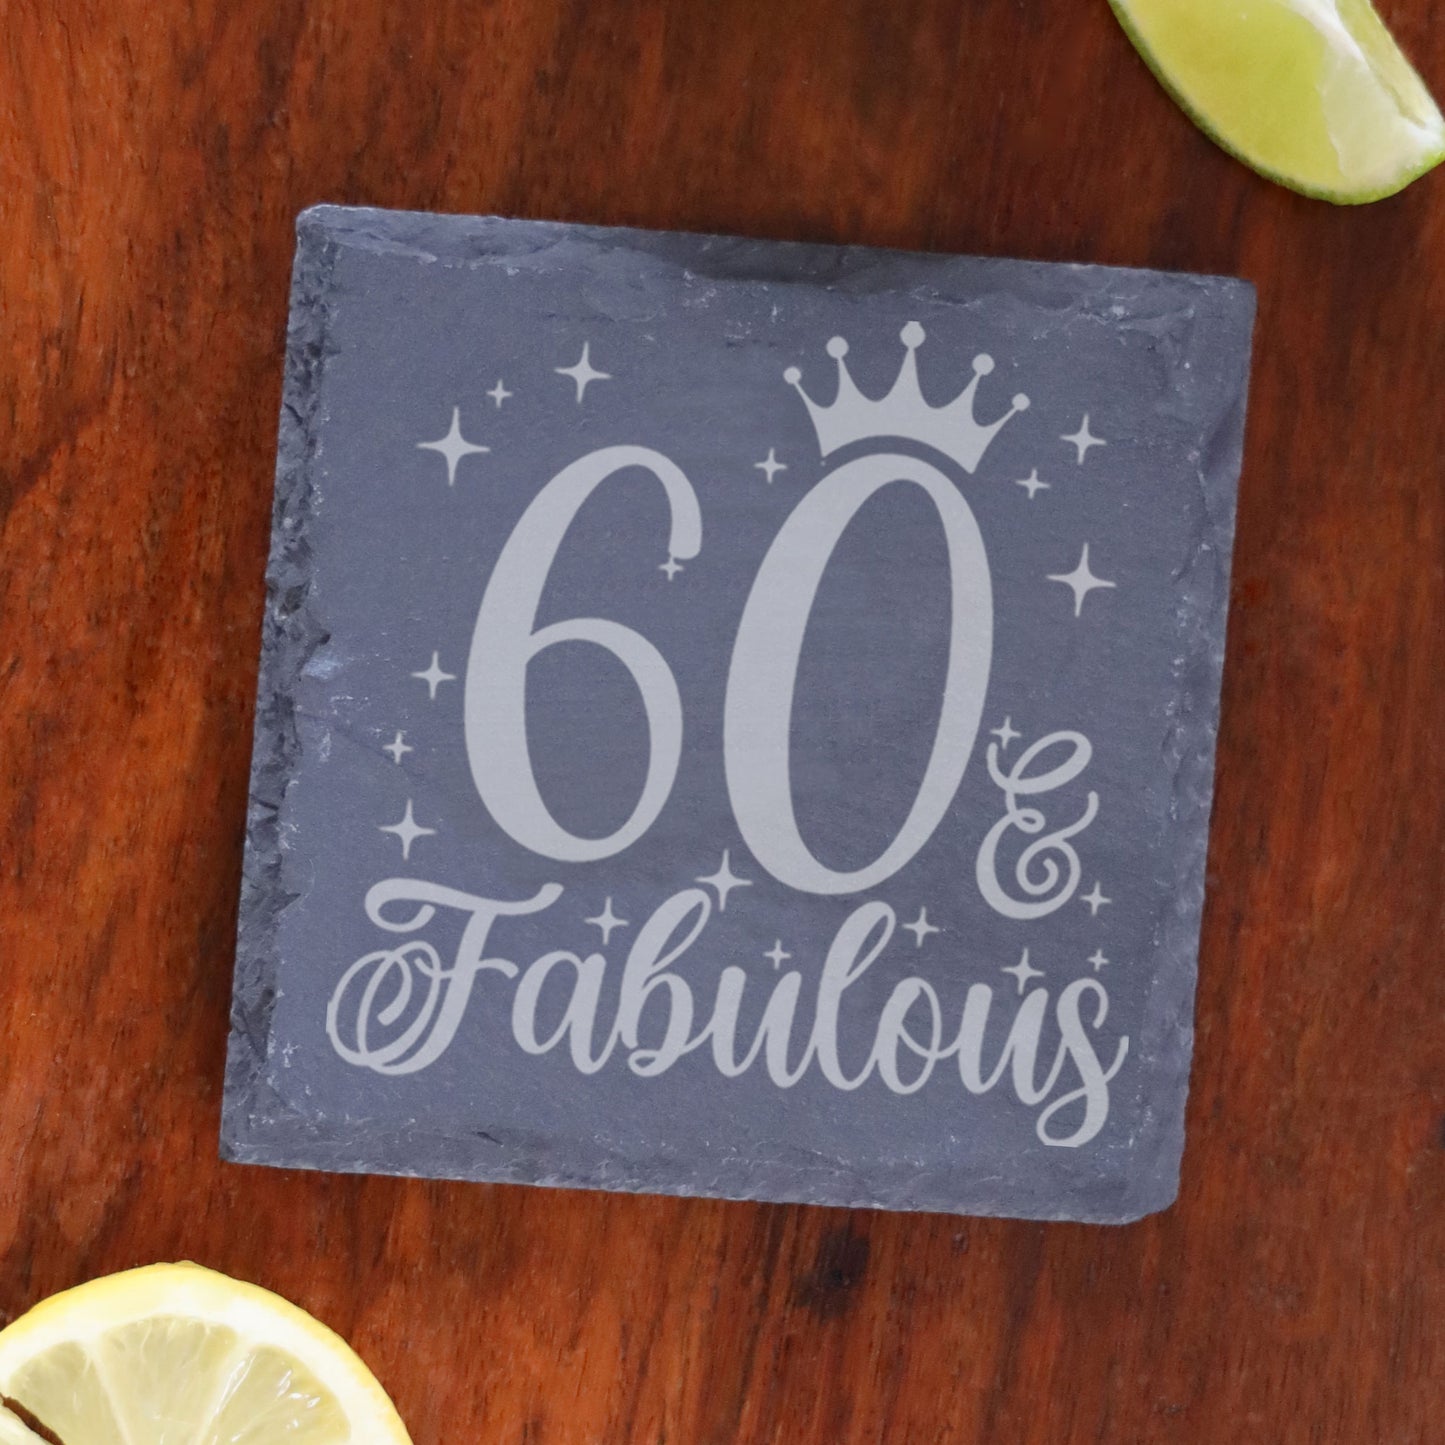 60 & Fabulous 60th Birthday Gift Engraved Wine Glass and/or Coaster Set  - Always Looking Good - Square Coaster Only  